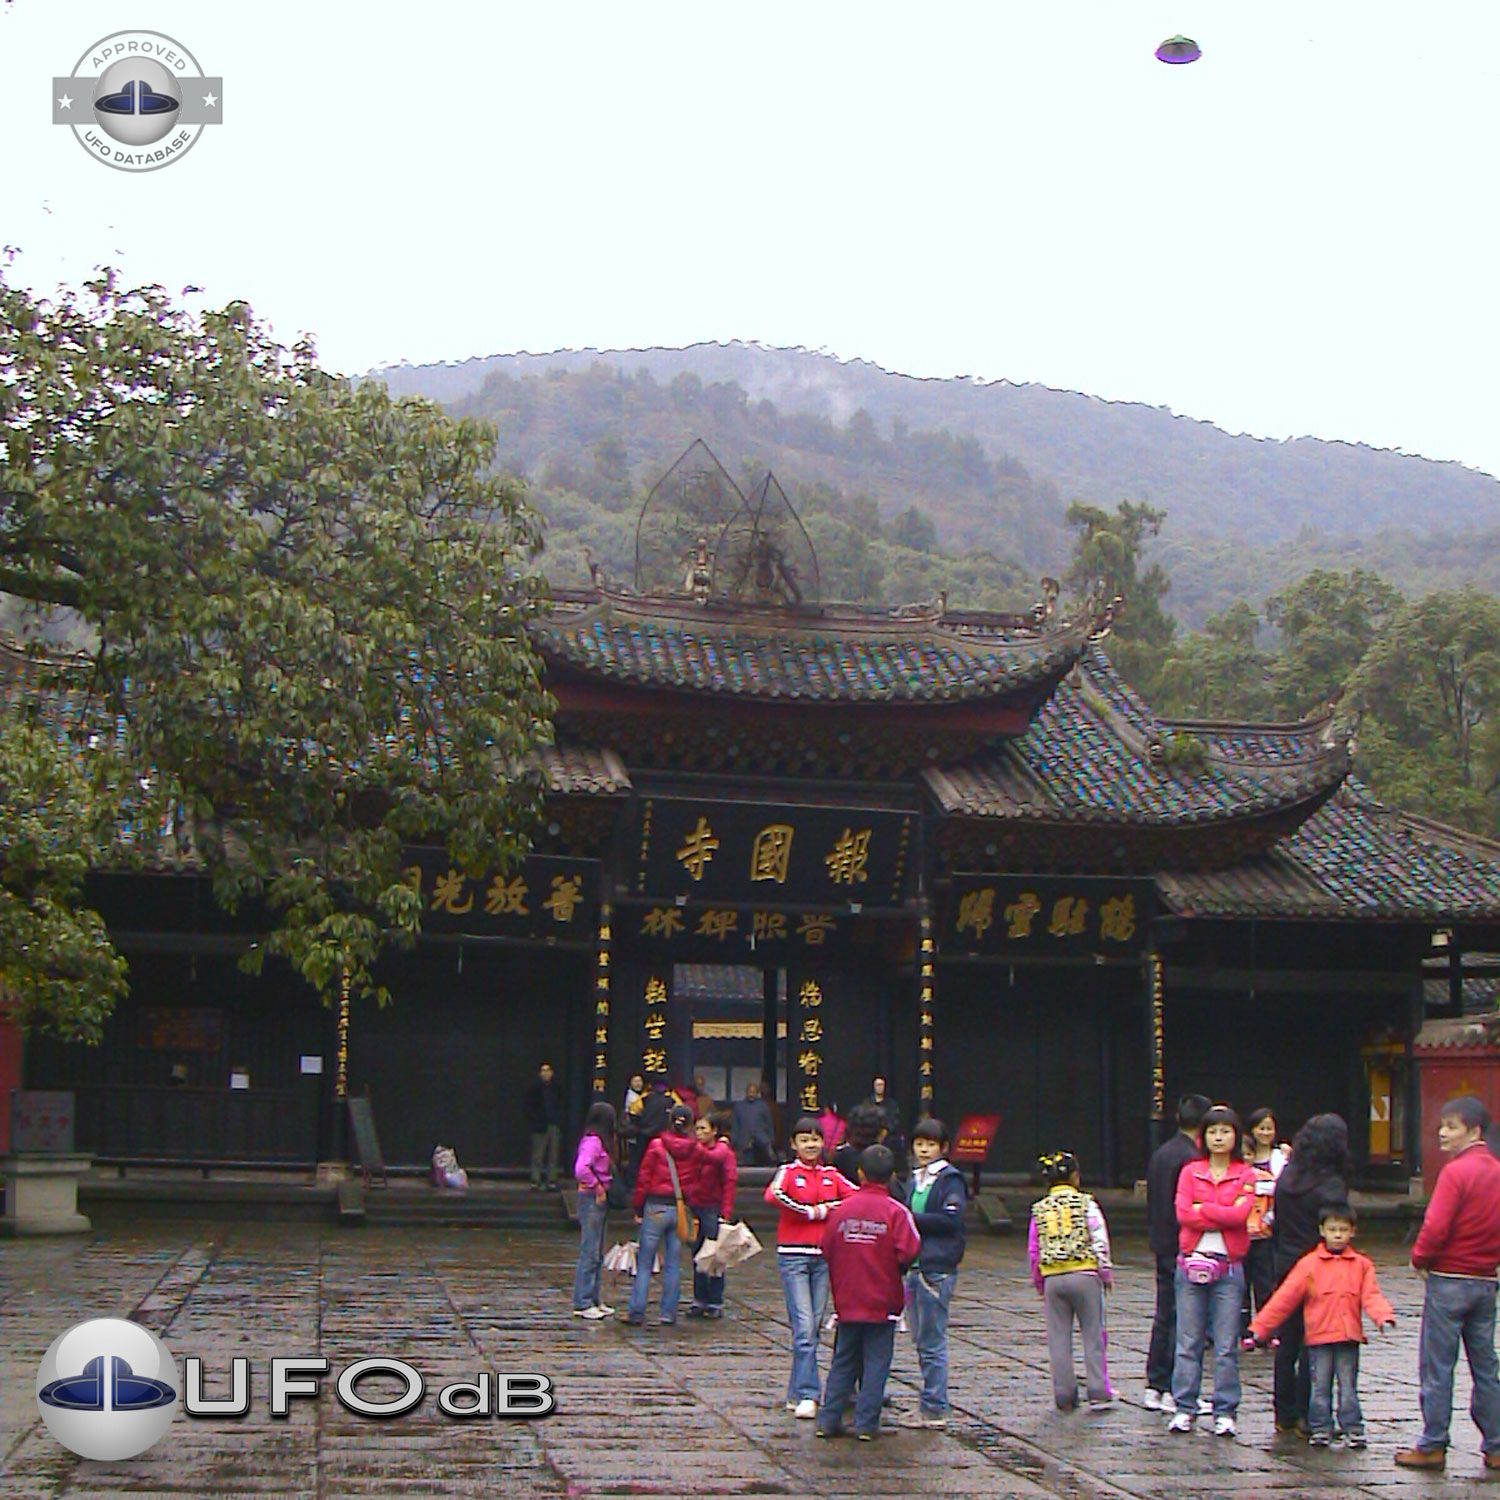 UFO picture shot near remote Monastery in Emei Shan | Sichuan, China UFO Picture #192-1